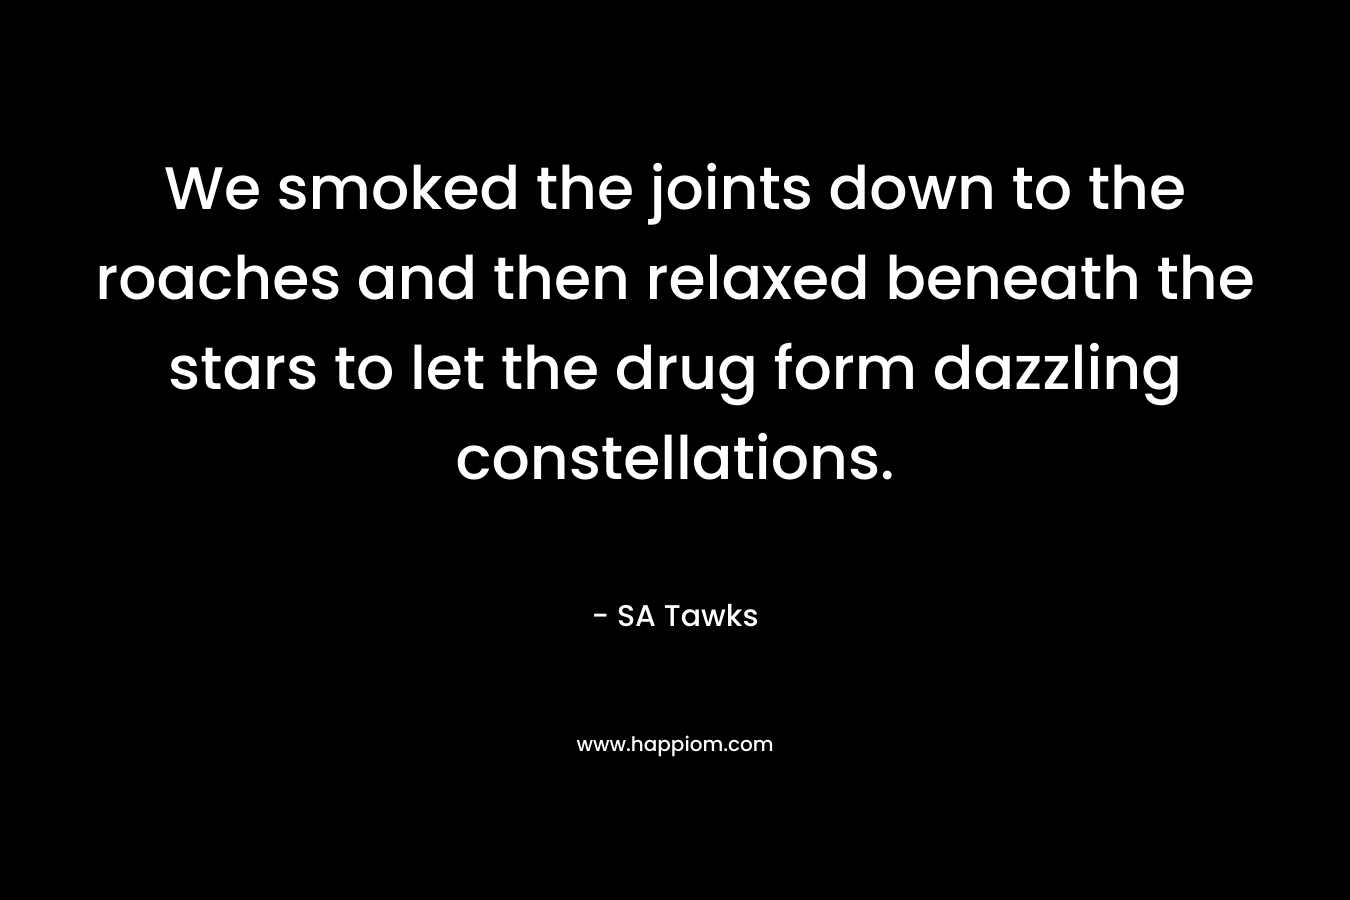 We smoked the joints down to the roaches and then relaxed beneath the stars to let the drug form dazzling constellations. – SA Tawks